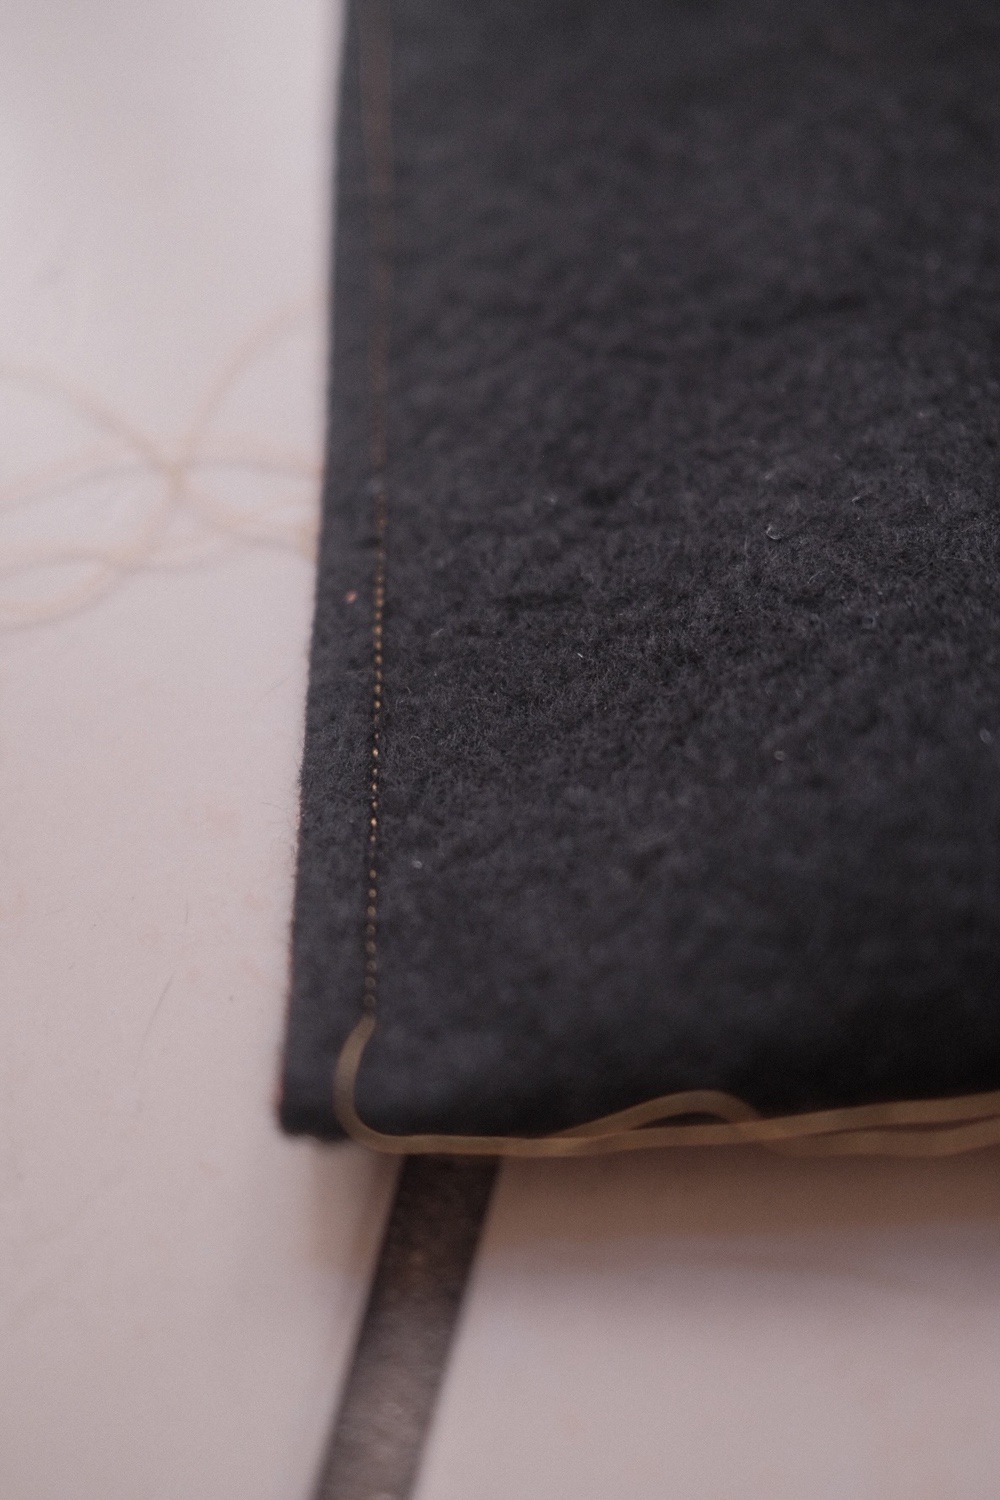 A close up of the sewn case" 